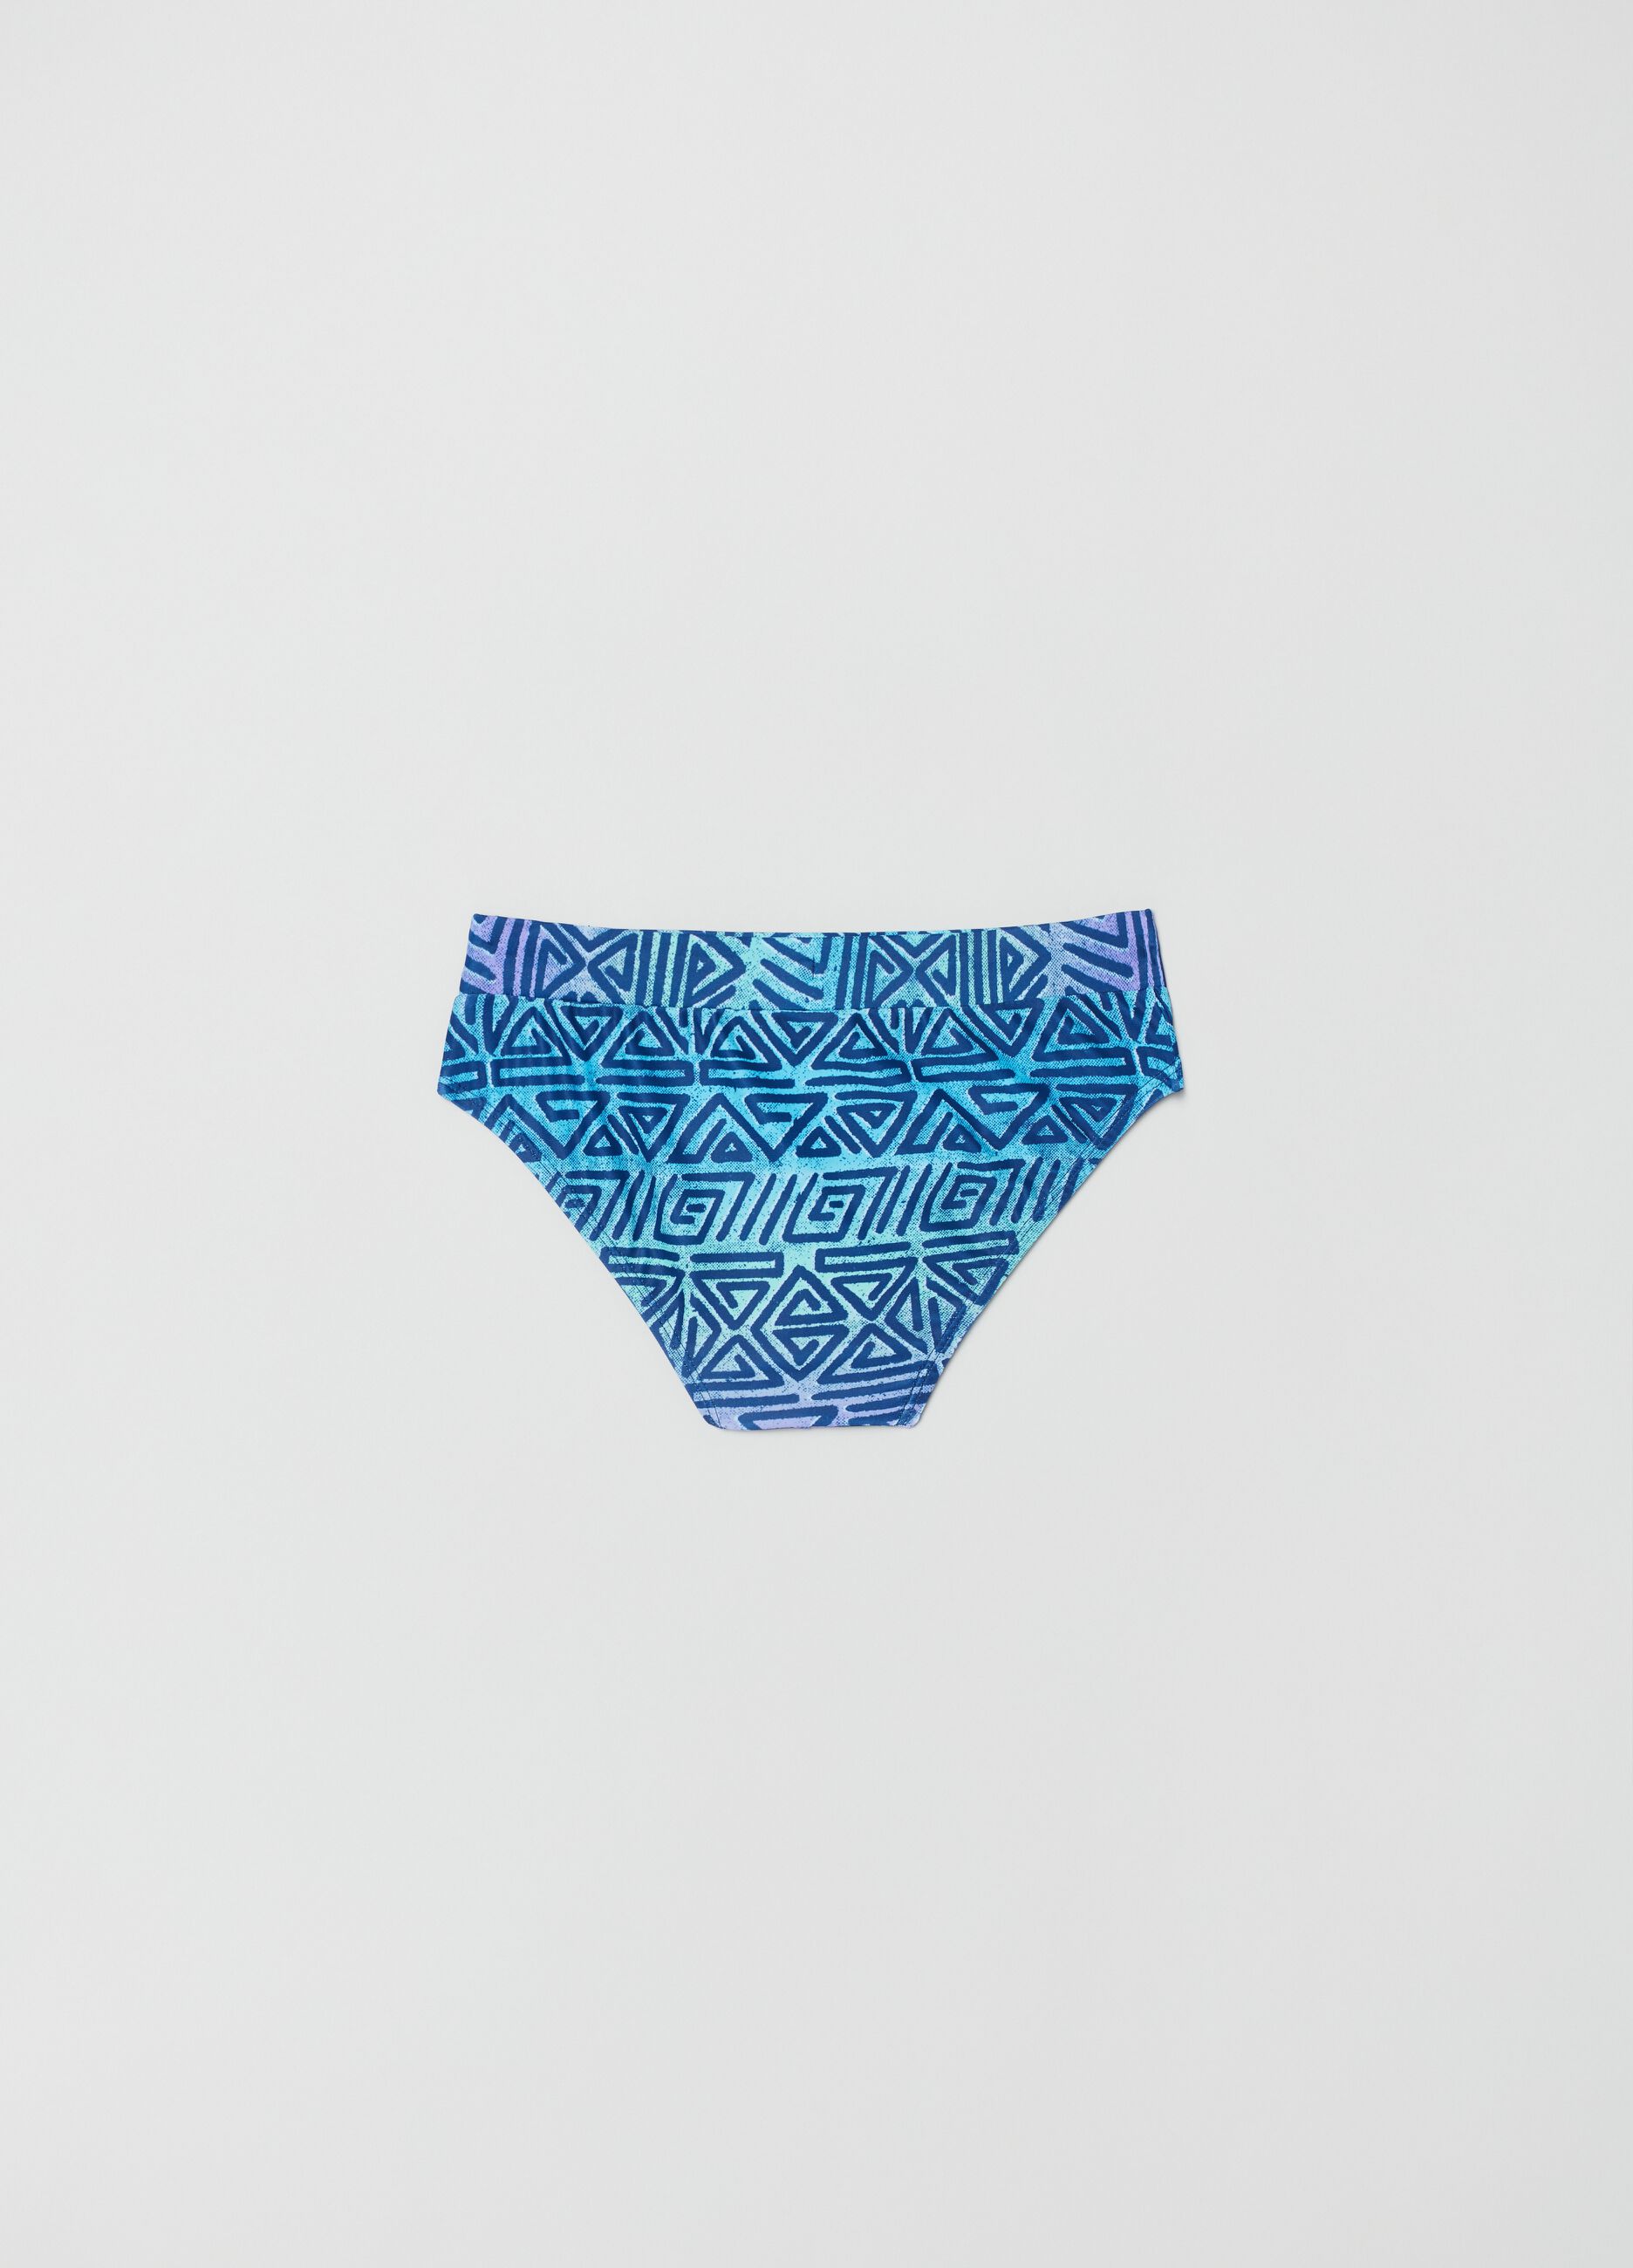 Swim briefs with Maui and Sons print